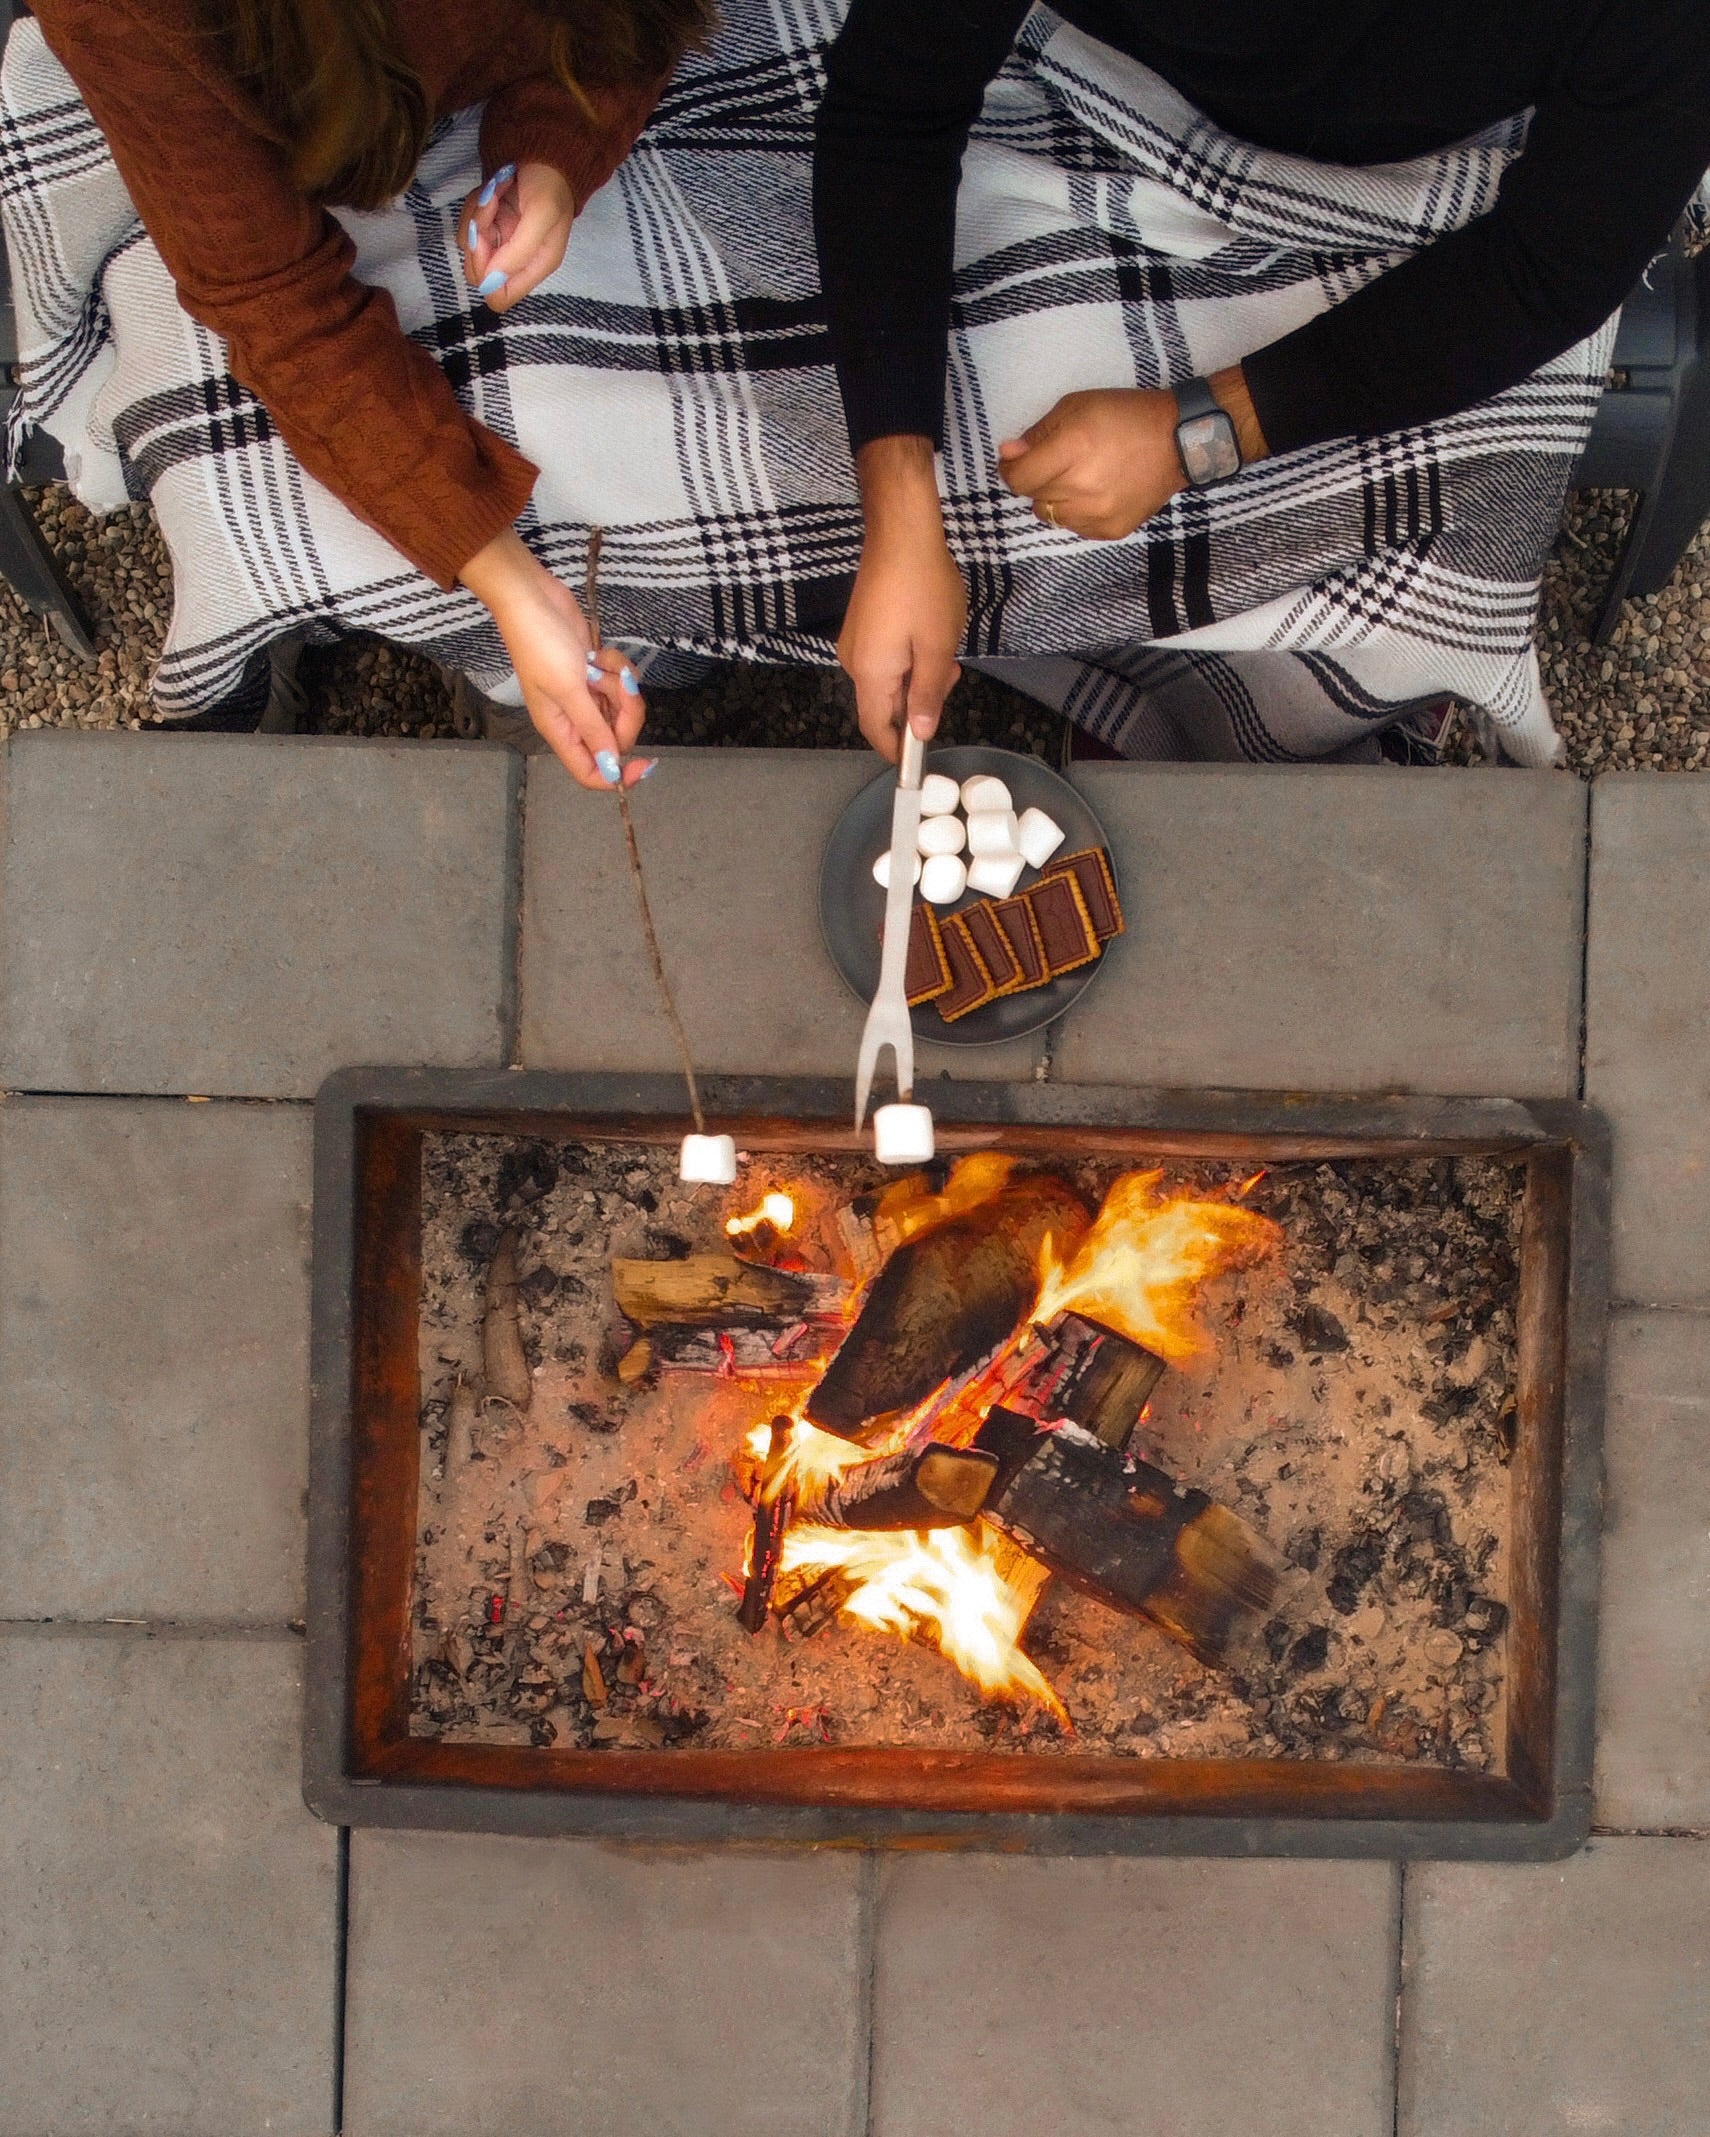 Smores around a cozy fire over an outdoor firepit